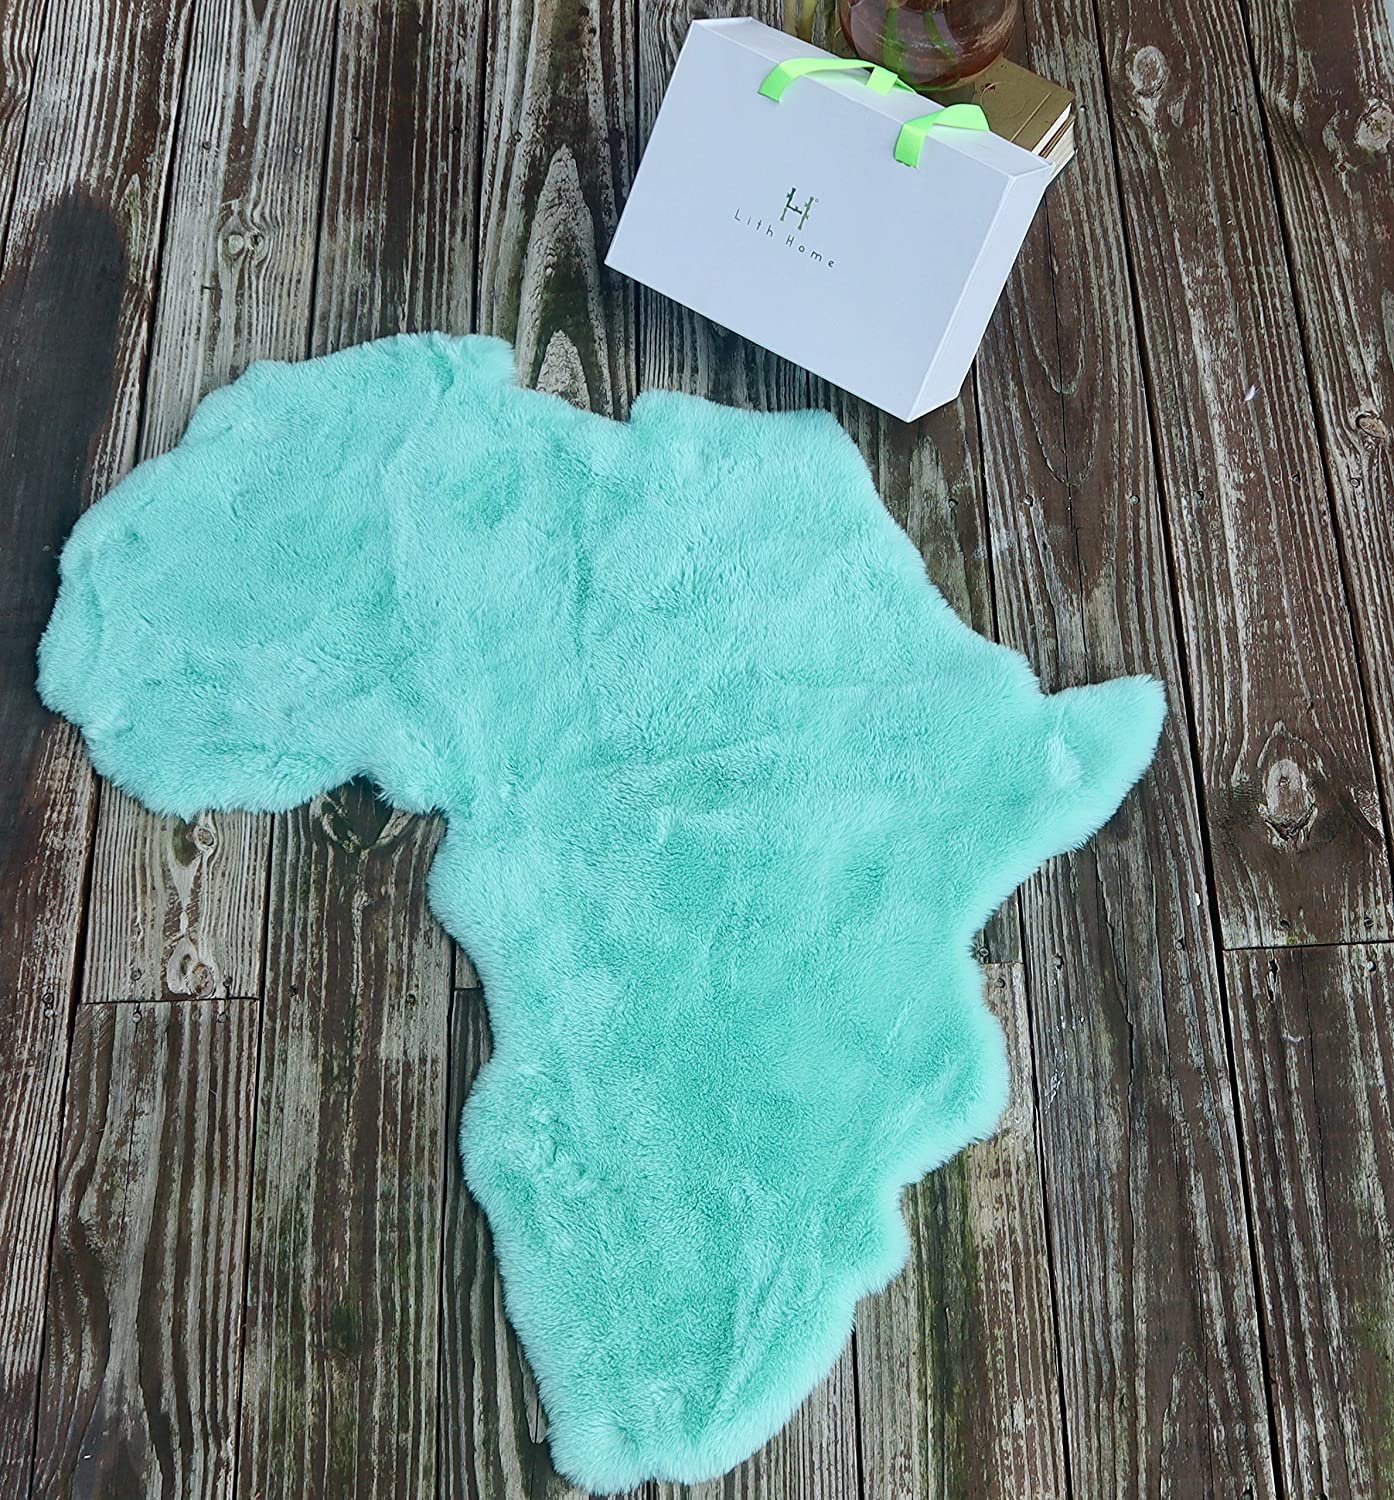 Teal / Turquoise Map of Africa Luxurious Faux Fur Rug/Throw